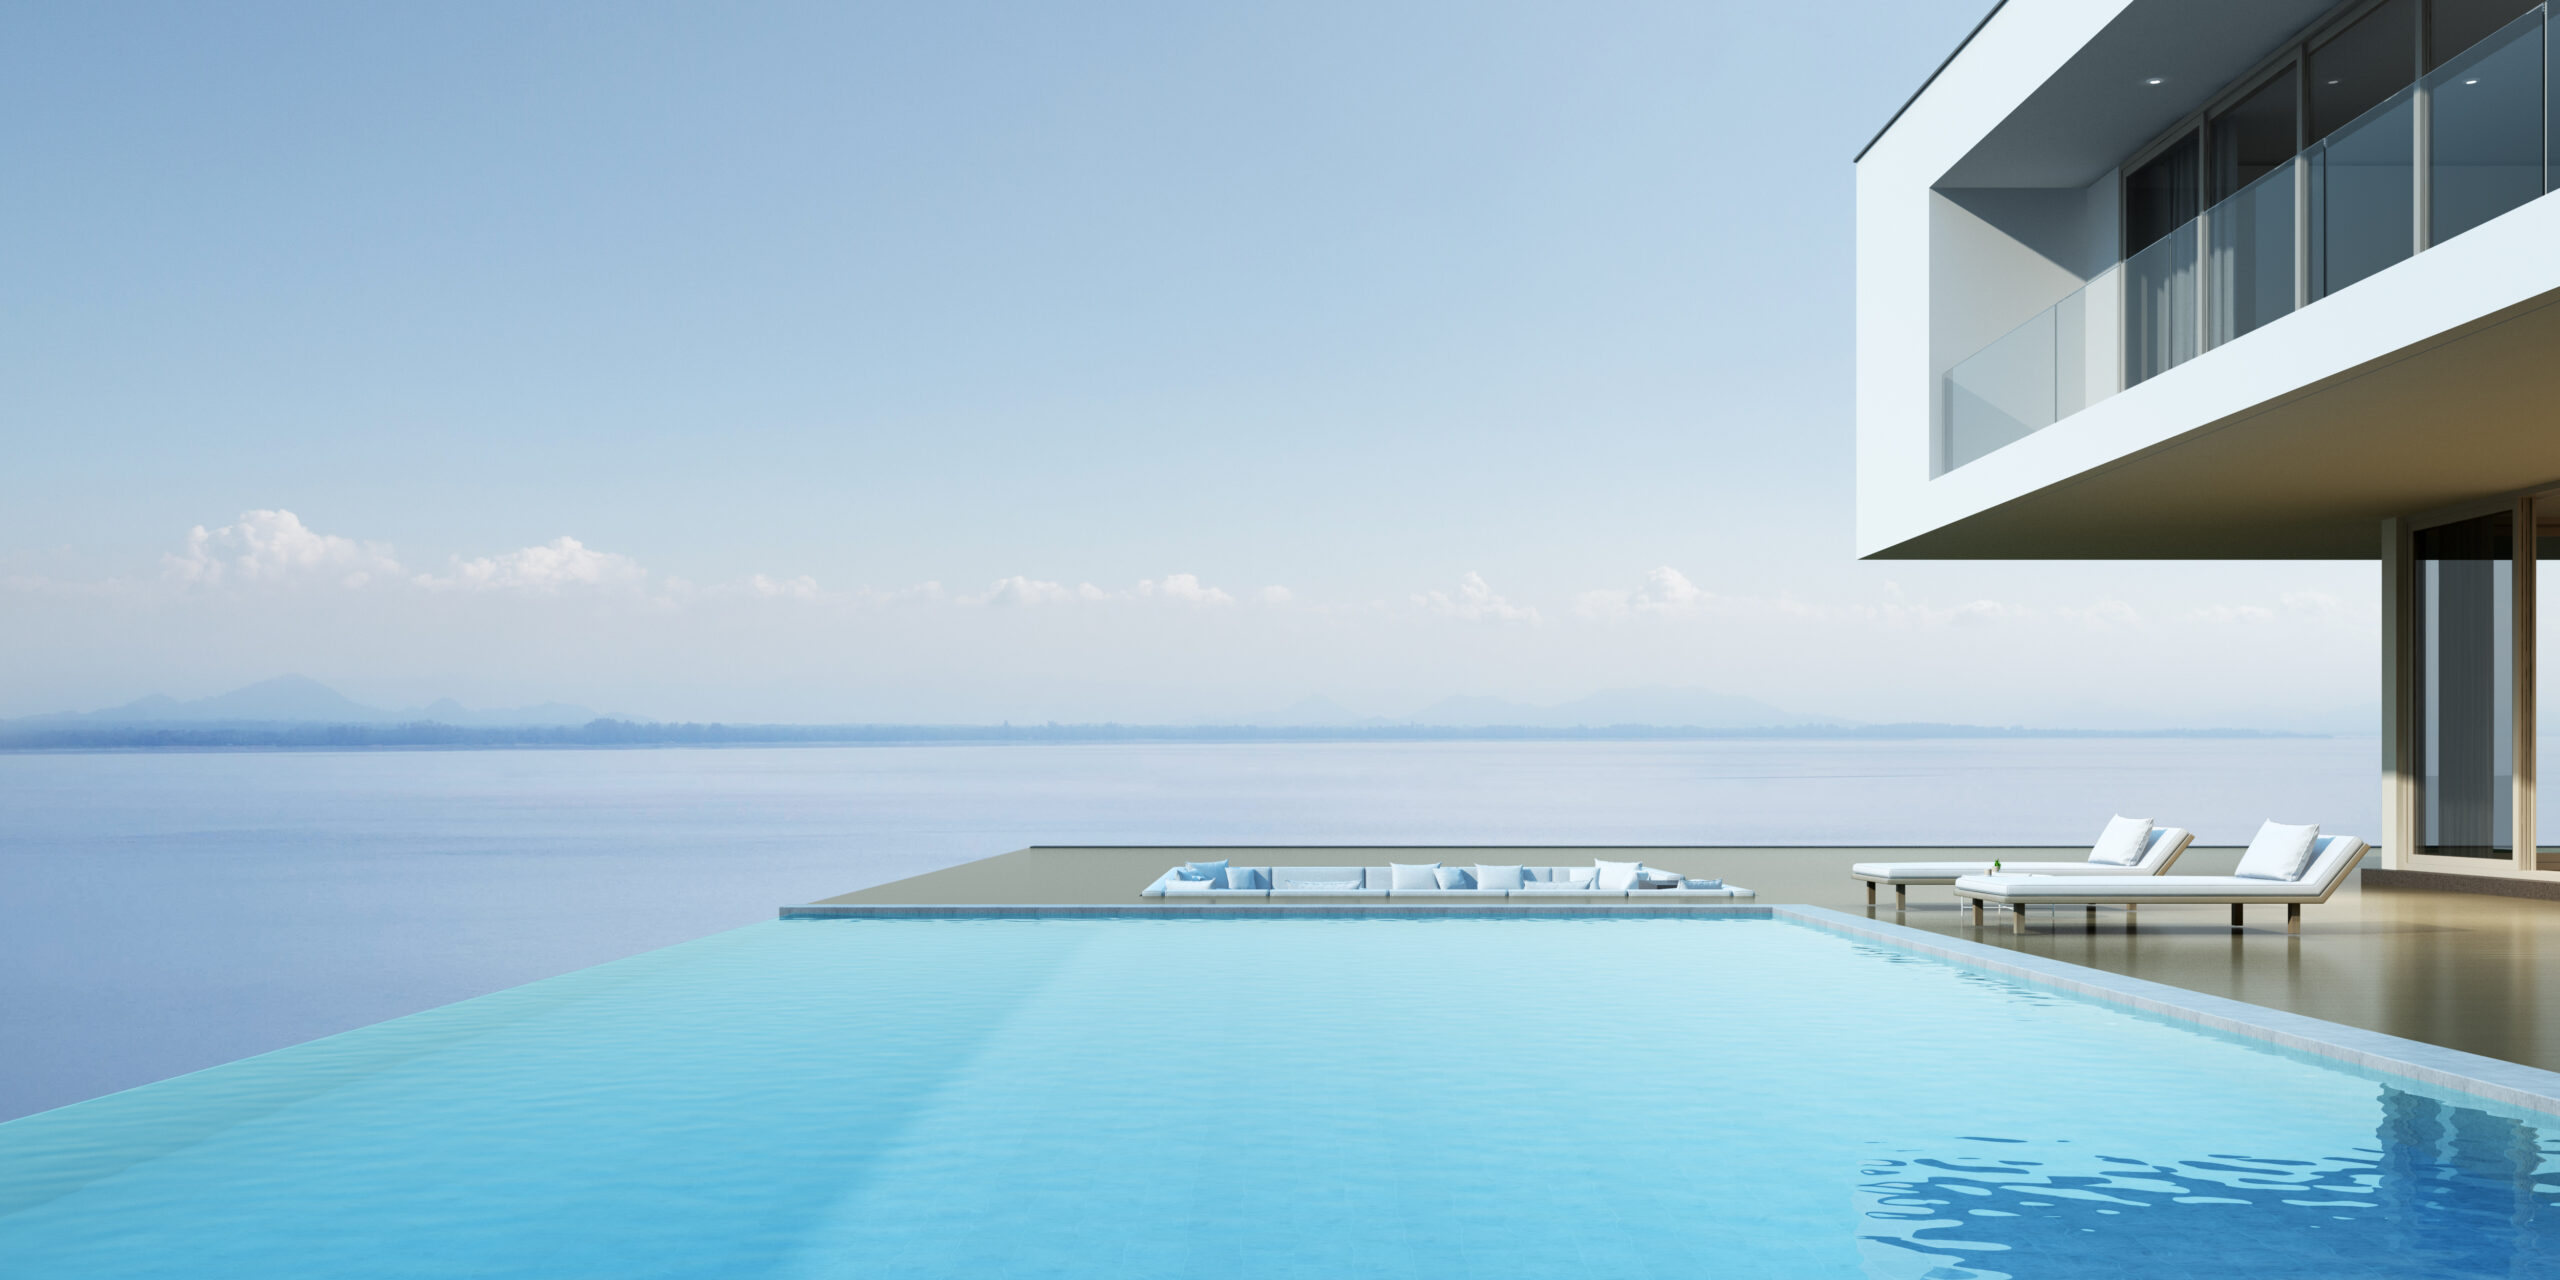 A rooftop overflow pool, positioned on top of a building, with its unique design allowing water to spill over the edges, offering a picturesque view and a sense of boundless tranquility